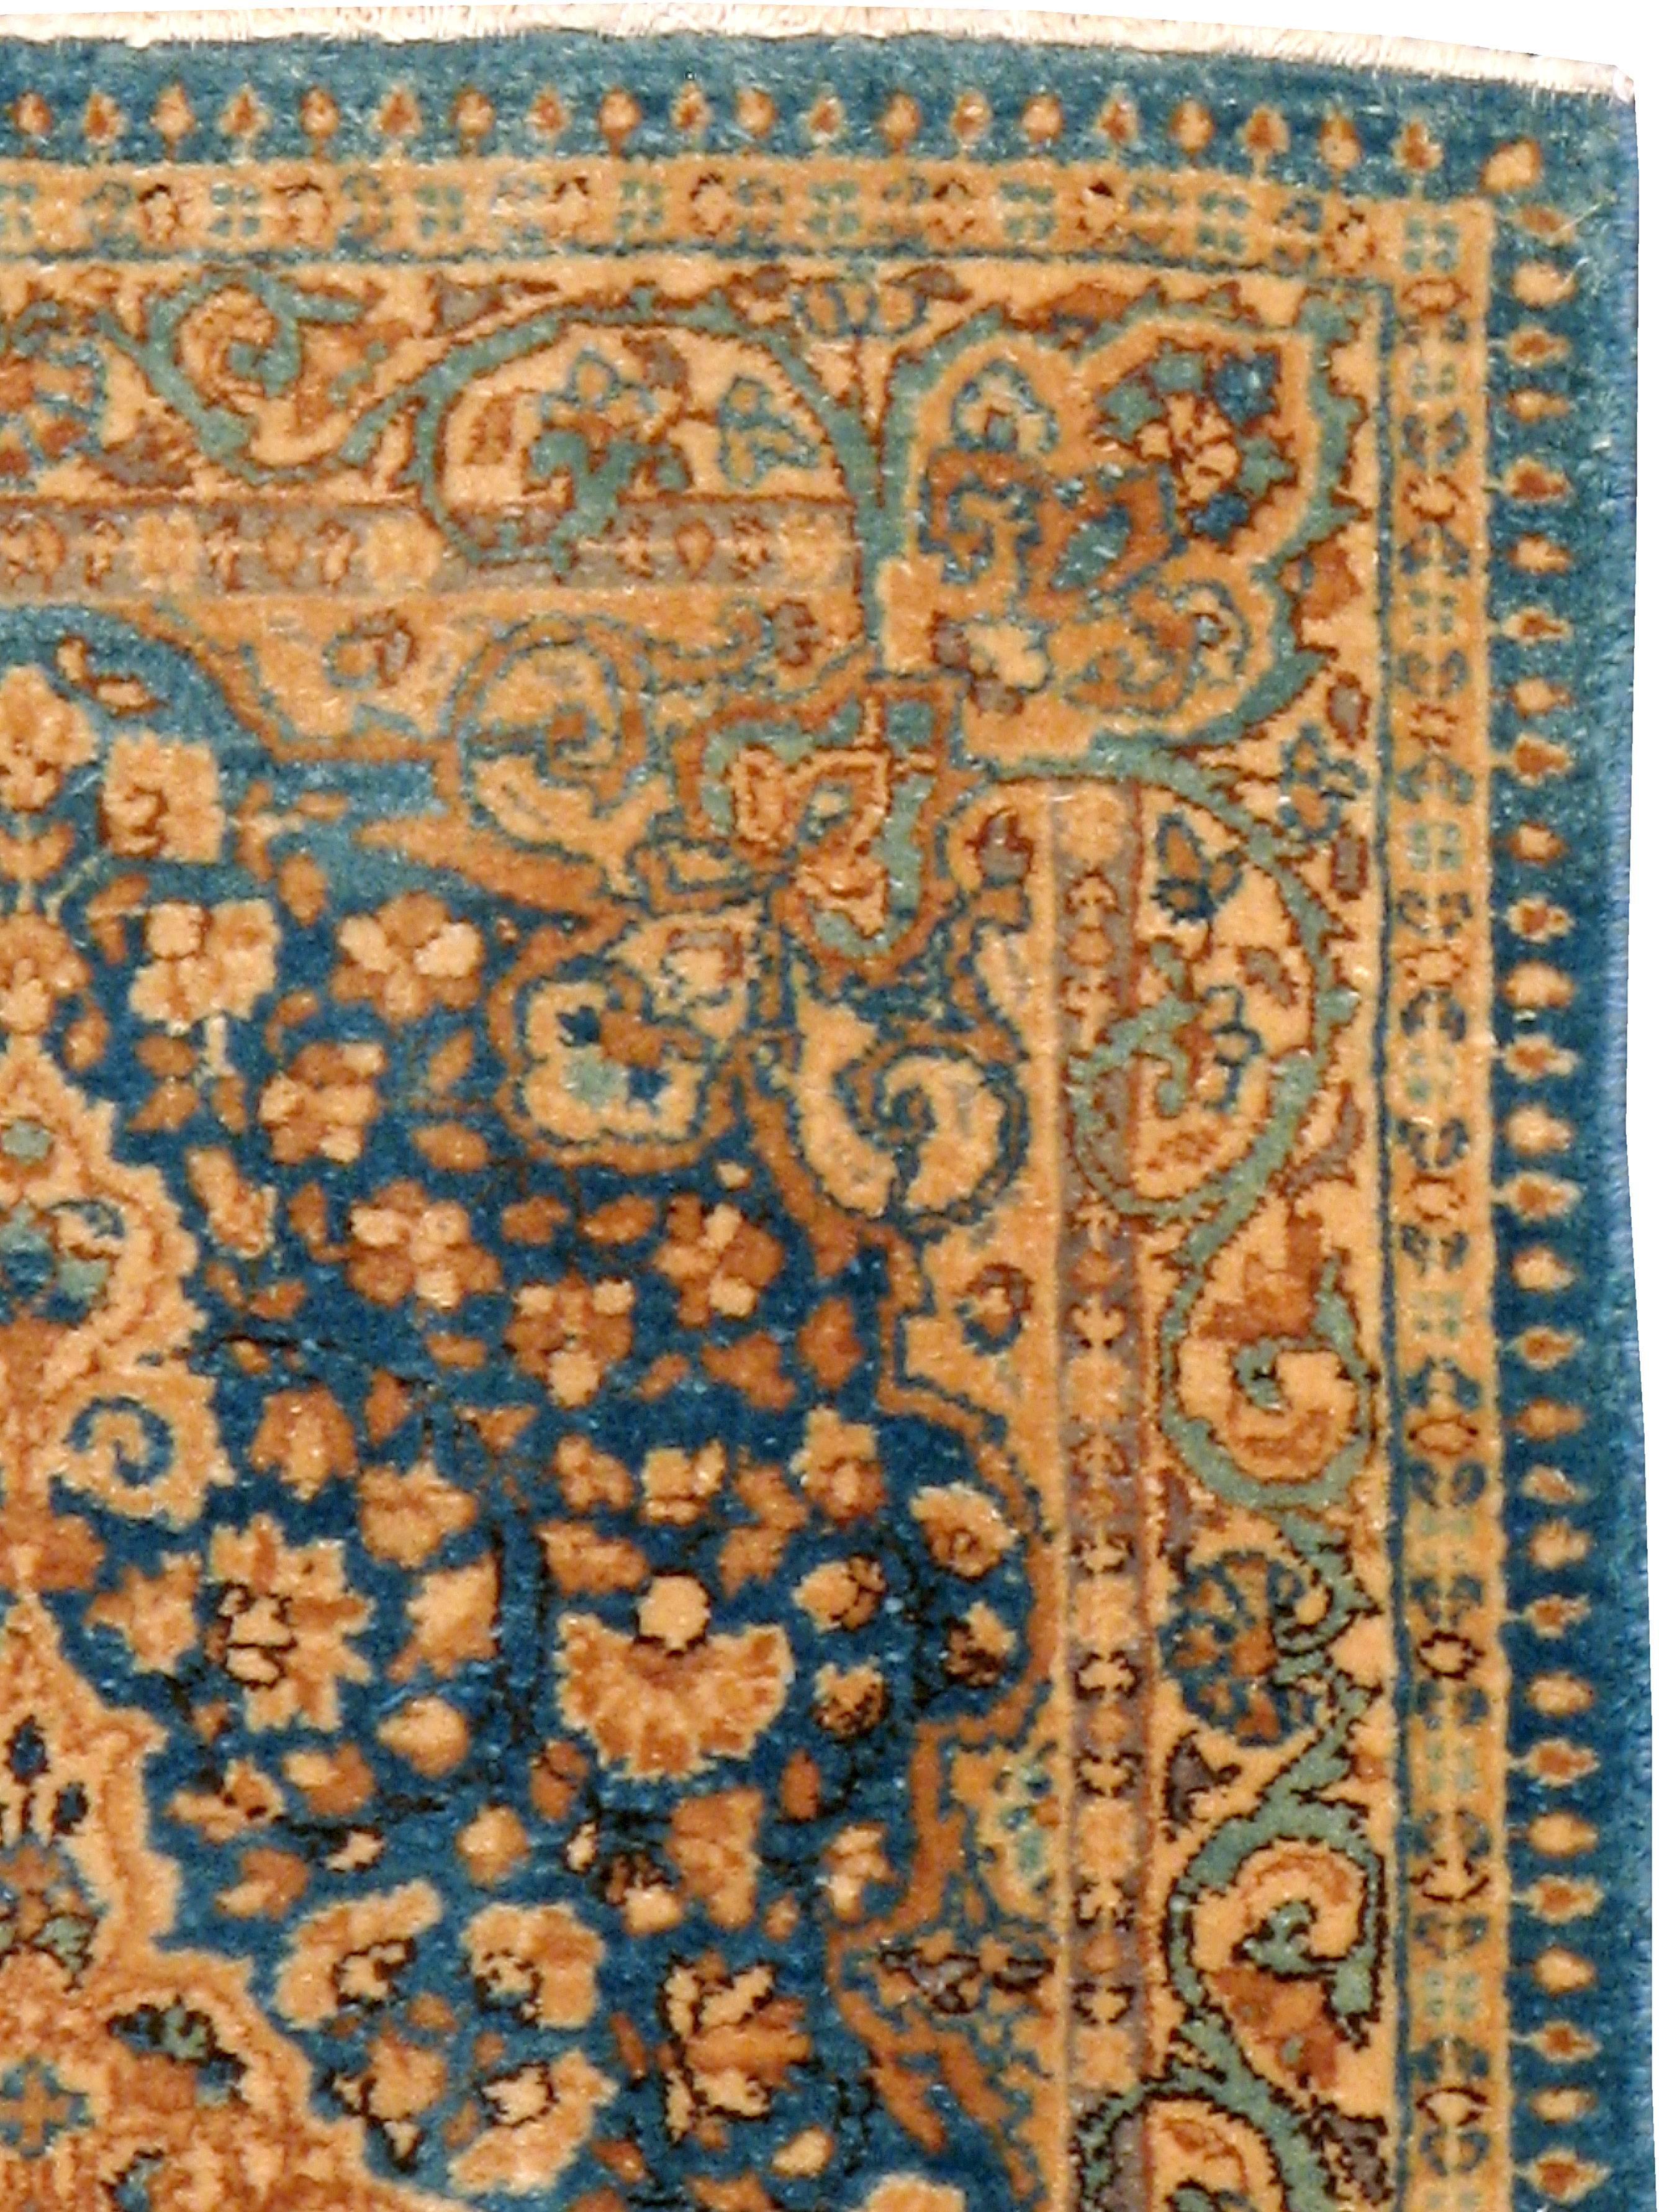 A vintage Persian Kerman rug from the mid-20th century.